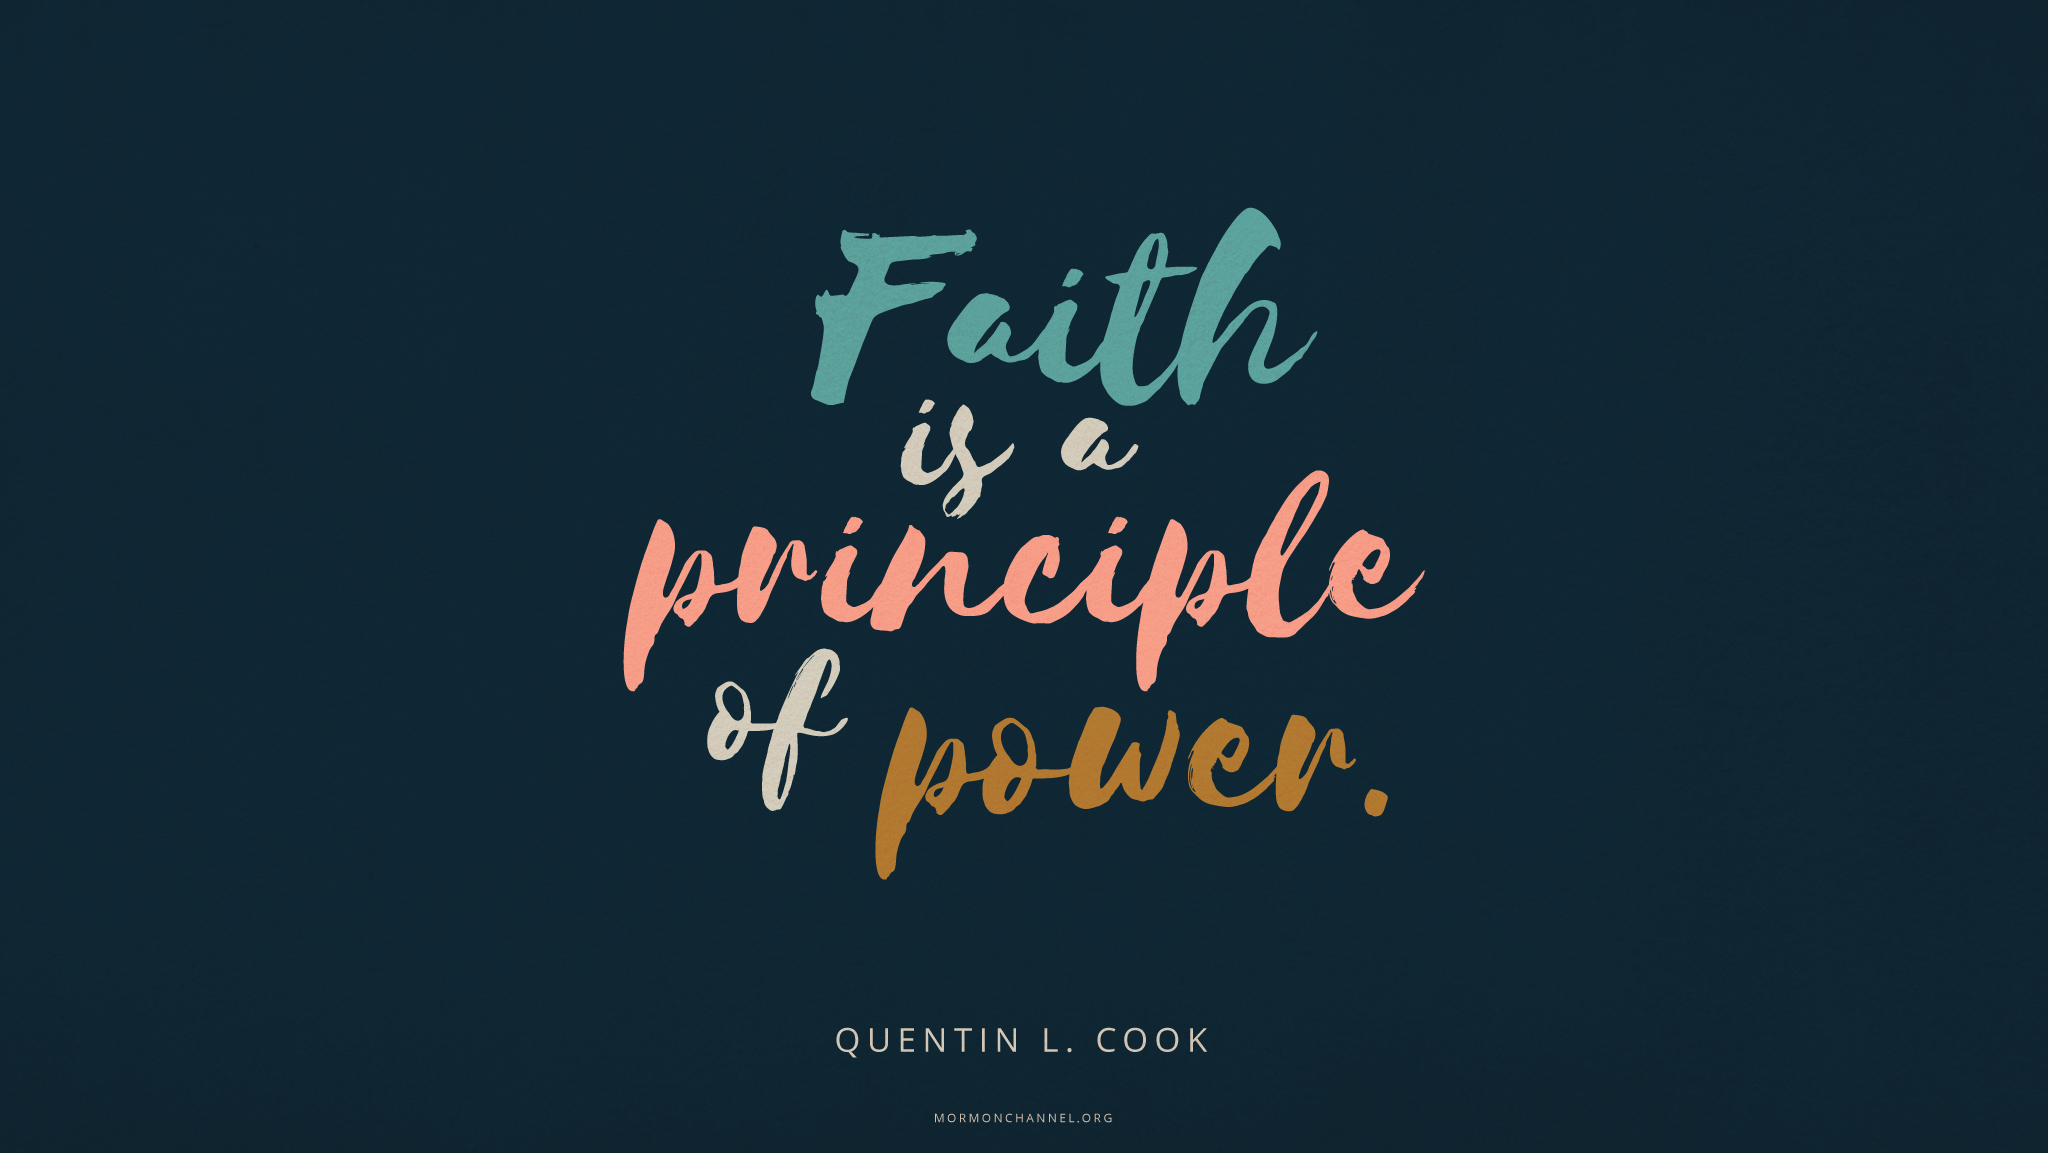 faith is a principle of power. quentin l. cook